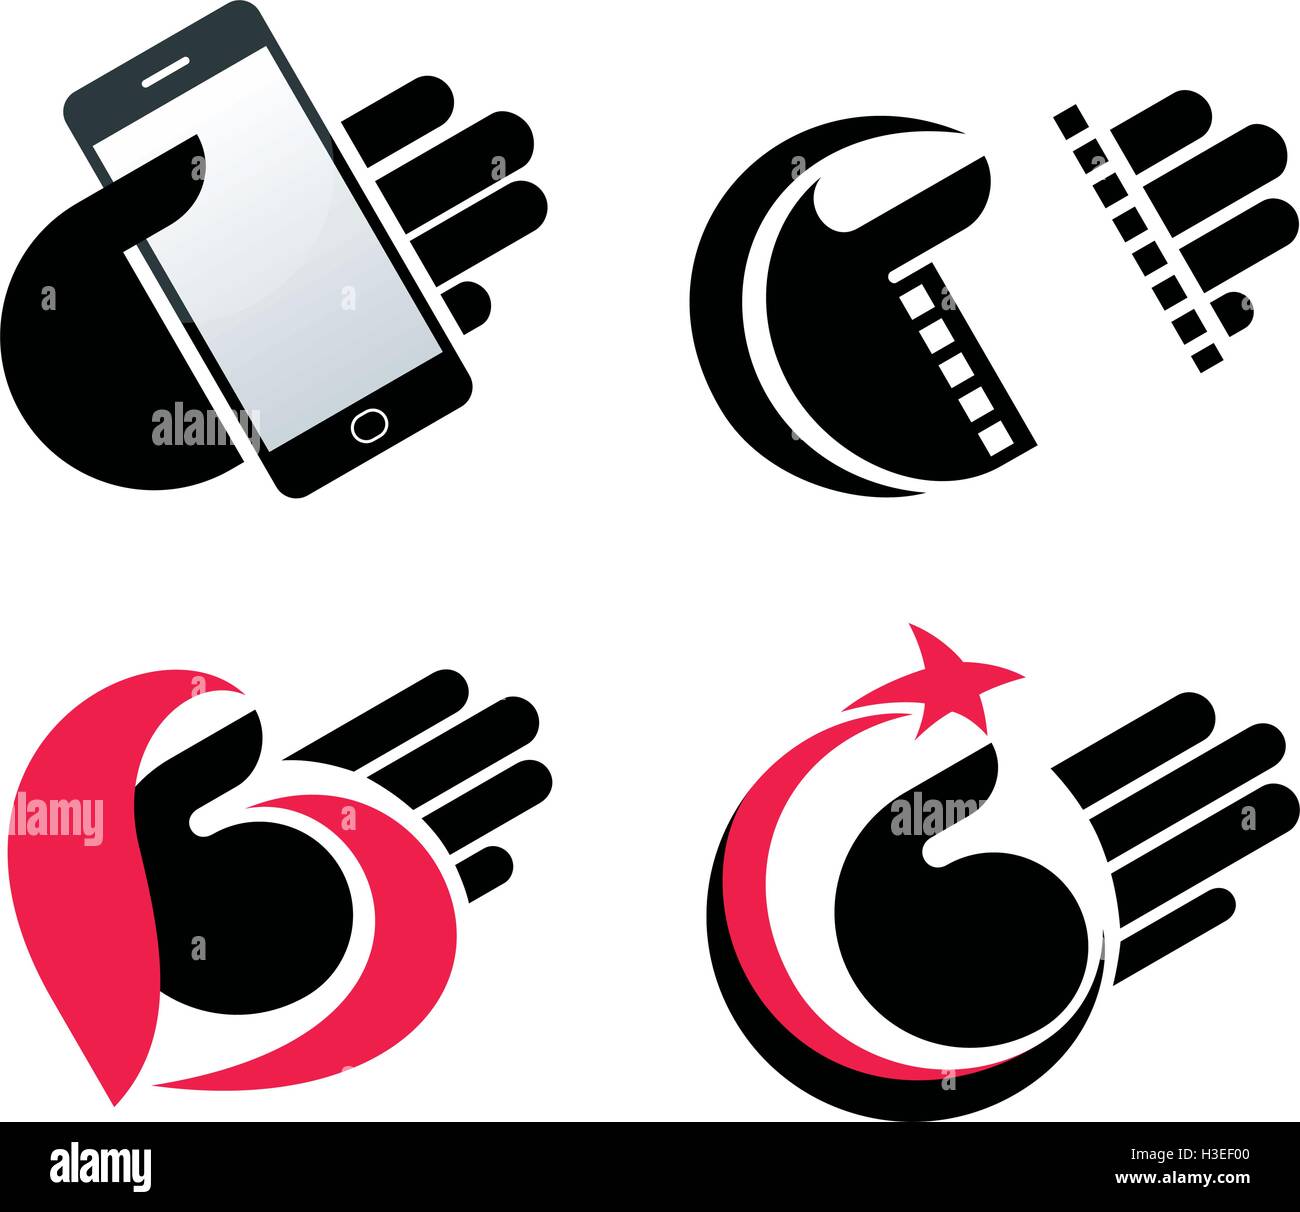 concept objects in hand. isolated smart phone, filmstrip, heart, moon, star vector icons eps10. Stock Vector